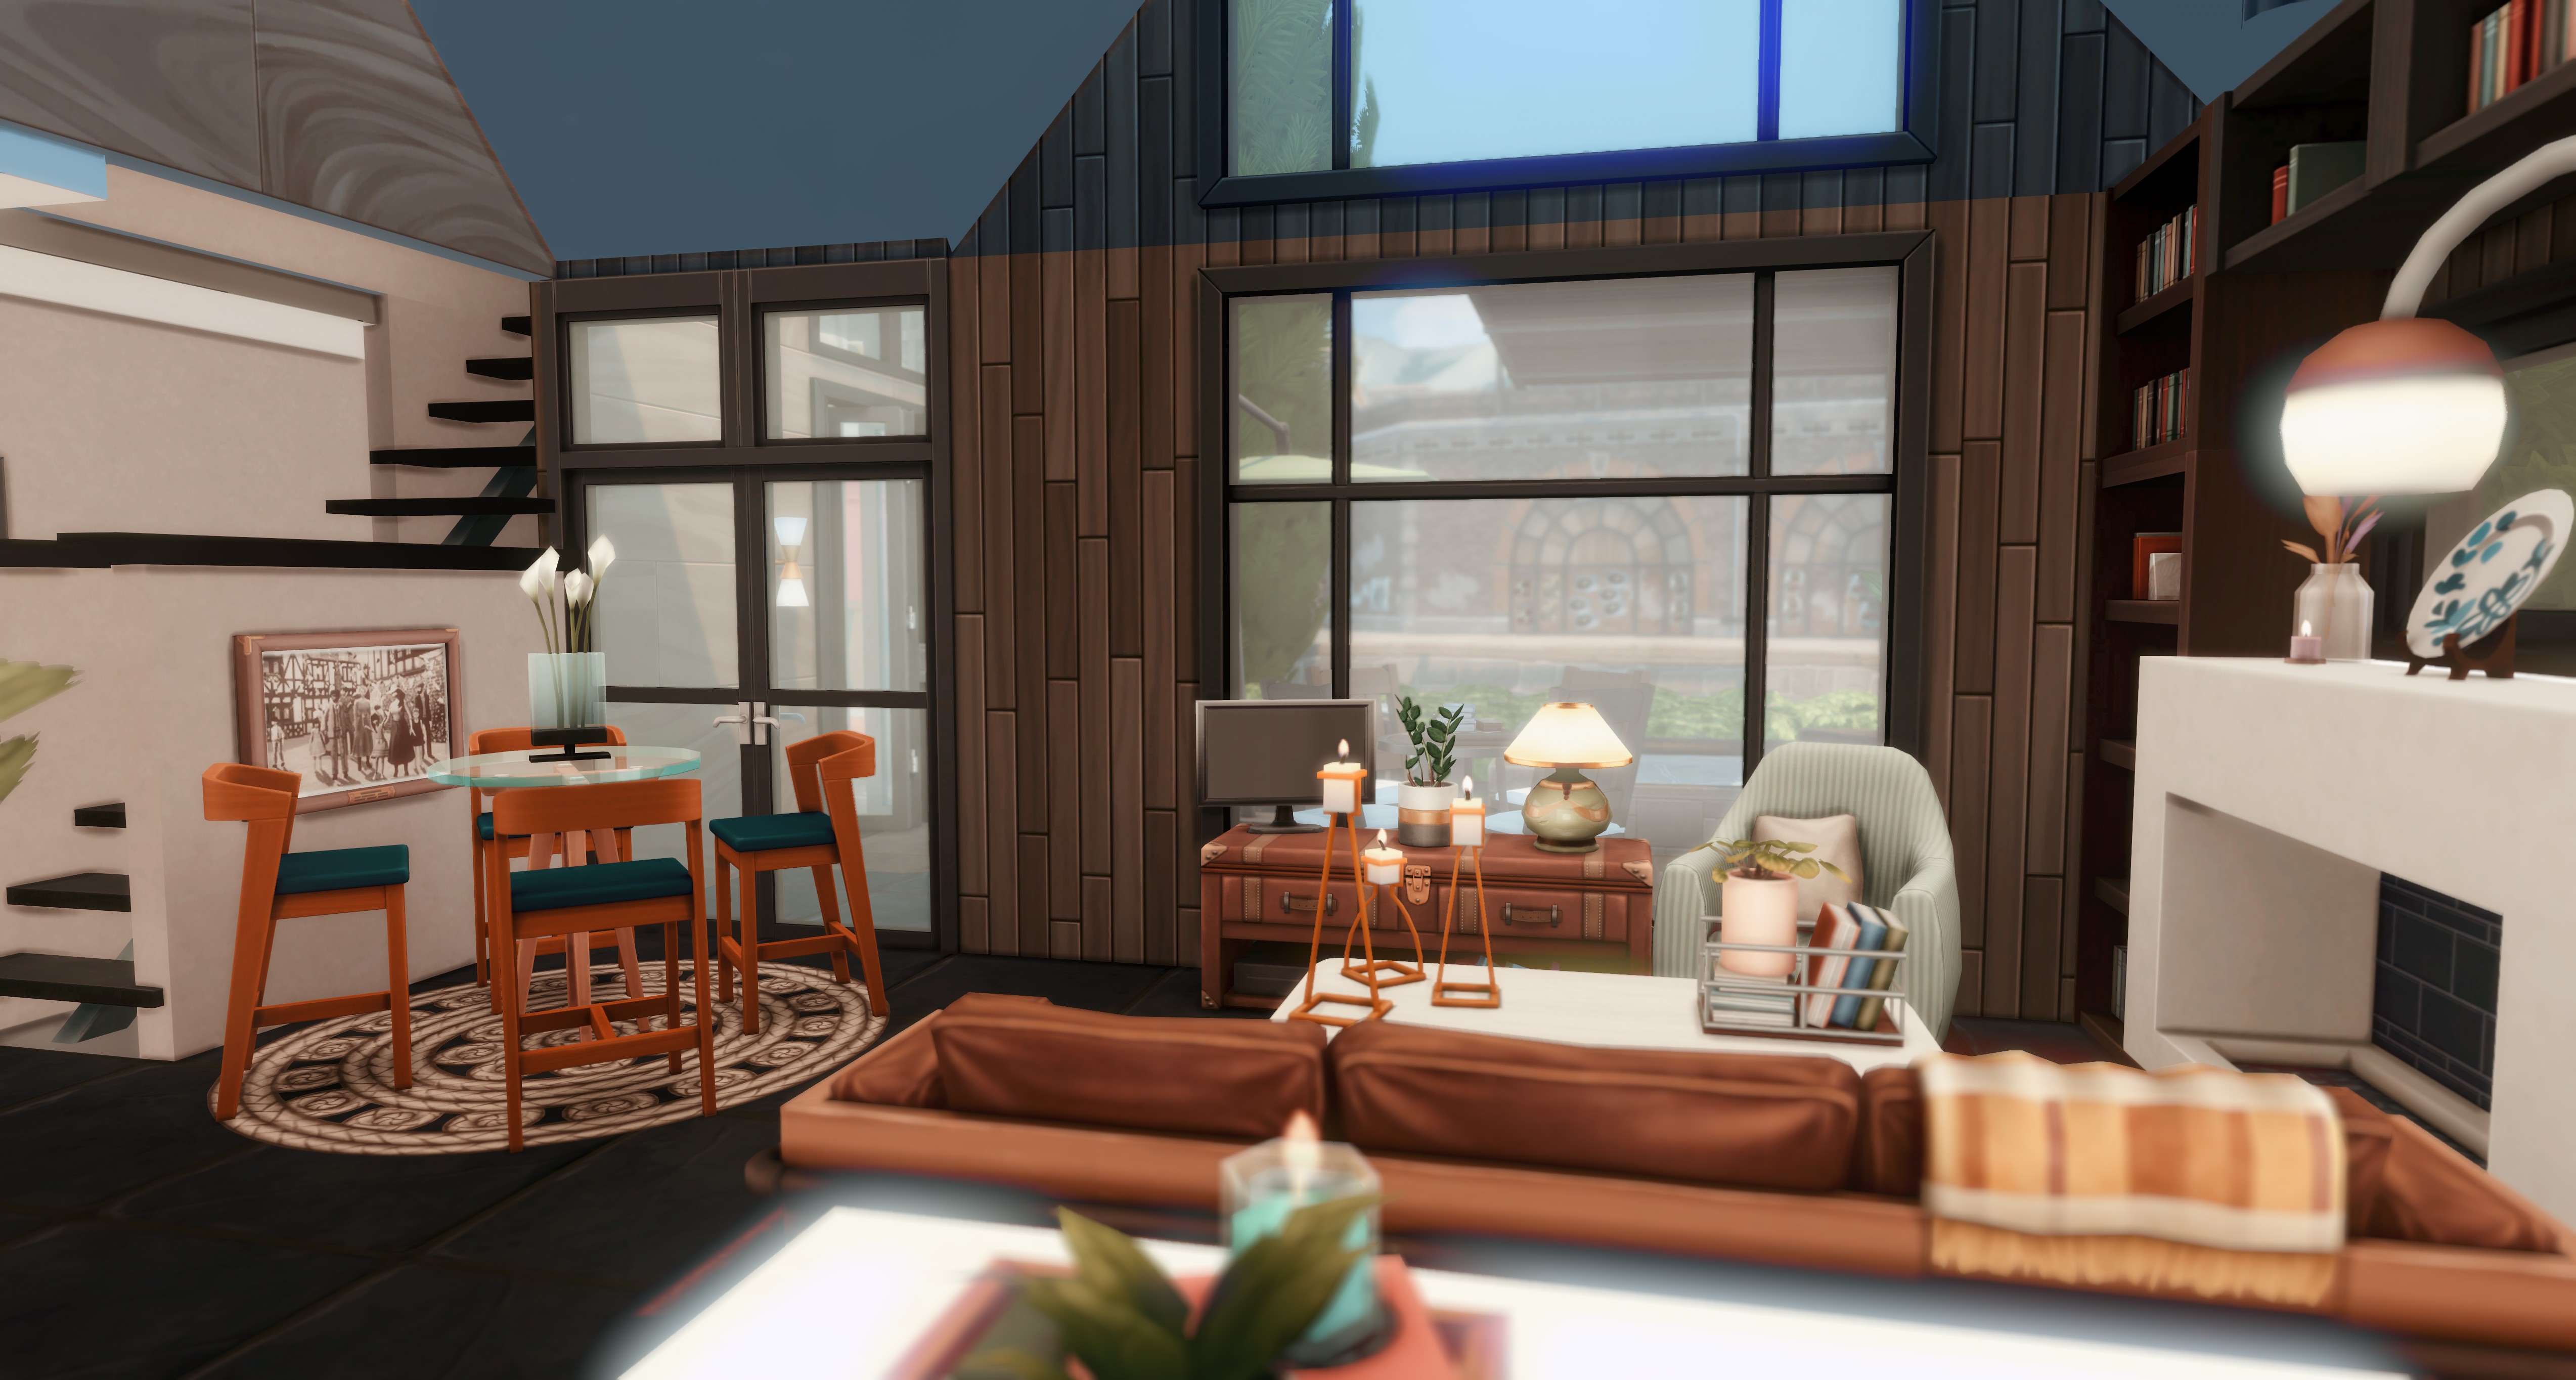 The Canal Corner by qubedesign - The Sims 4 Rooms / Lots - CurseForge